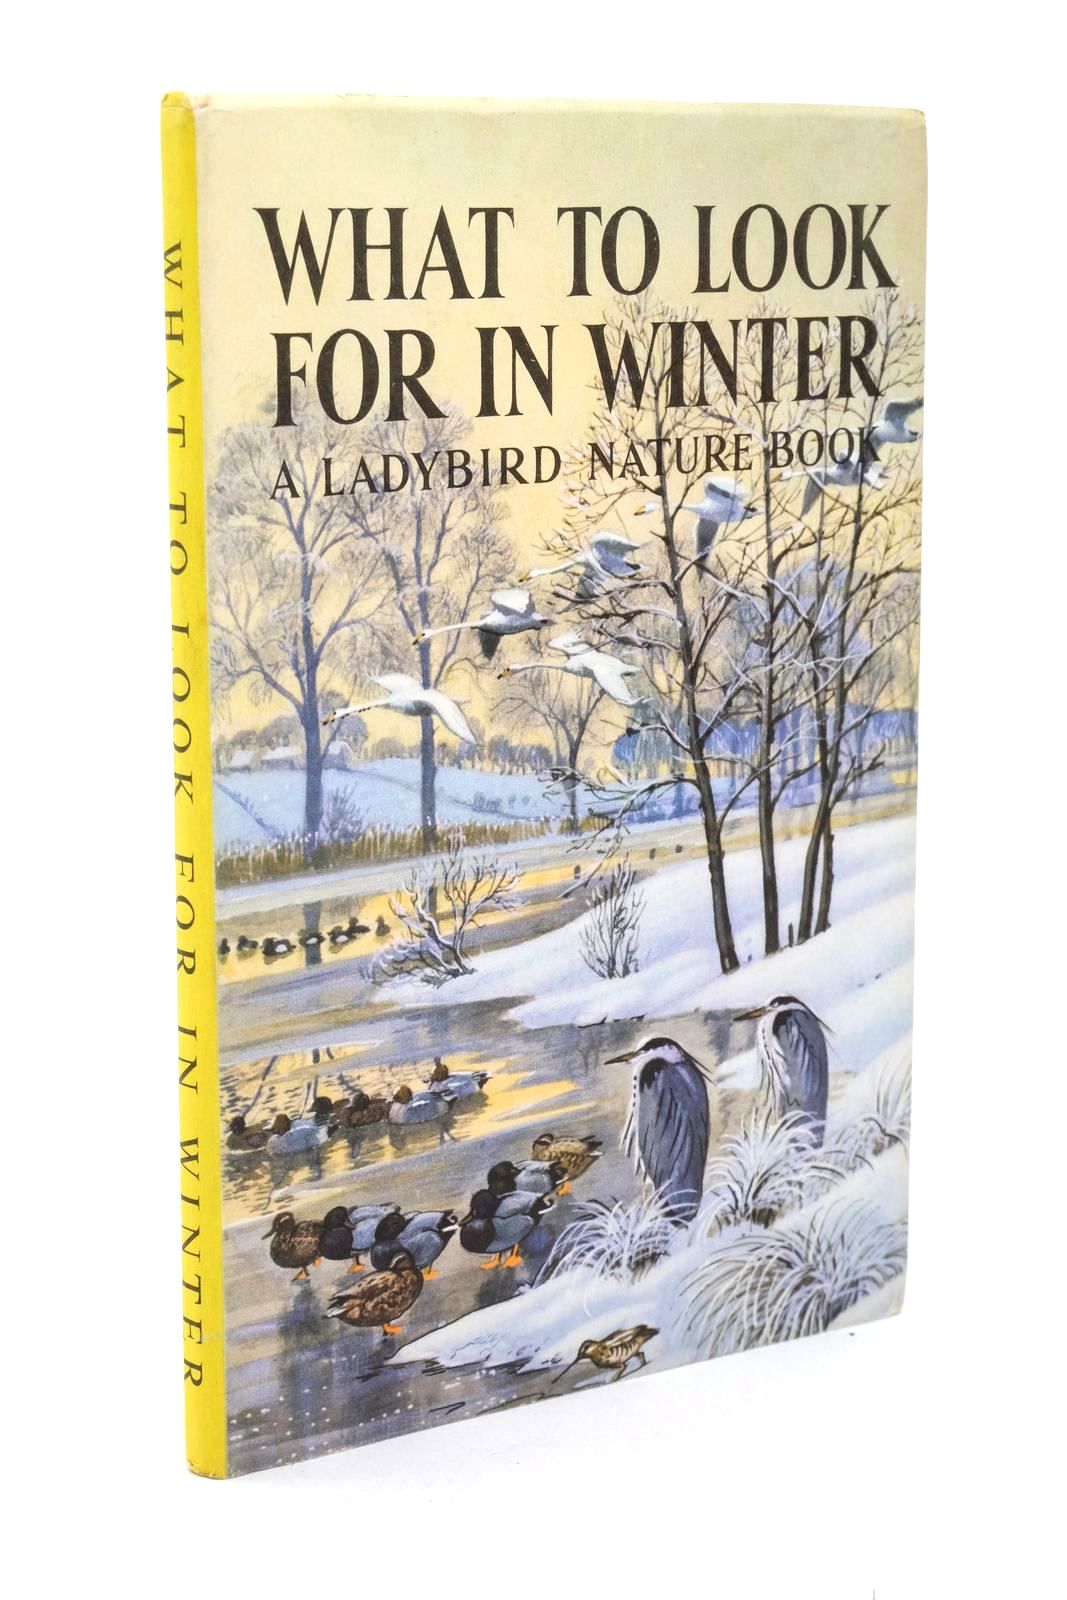 Photo of WHAT TO LOOK FOR IN WINTER written by Watson, E.L. Grant illustrated by Tunnicliffe, C.F. published by Wills & Hepworth Ltd. (STOCK CODE: 1322764)  for sale by Stella & Rose's Books